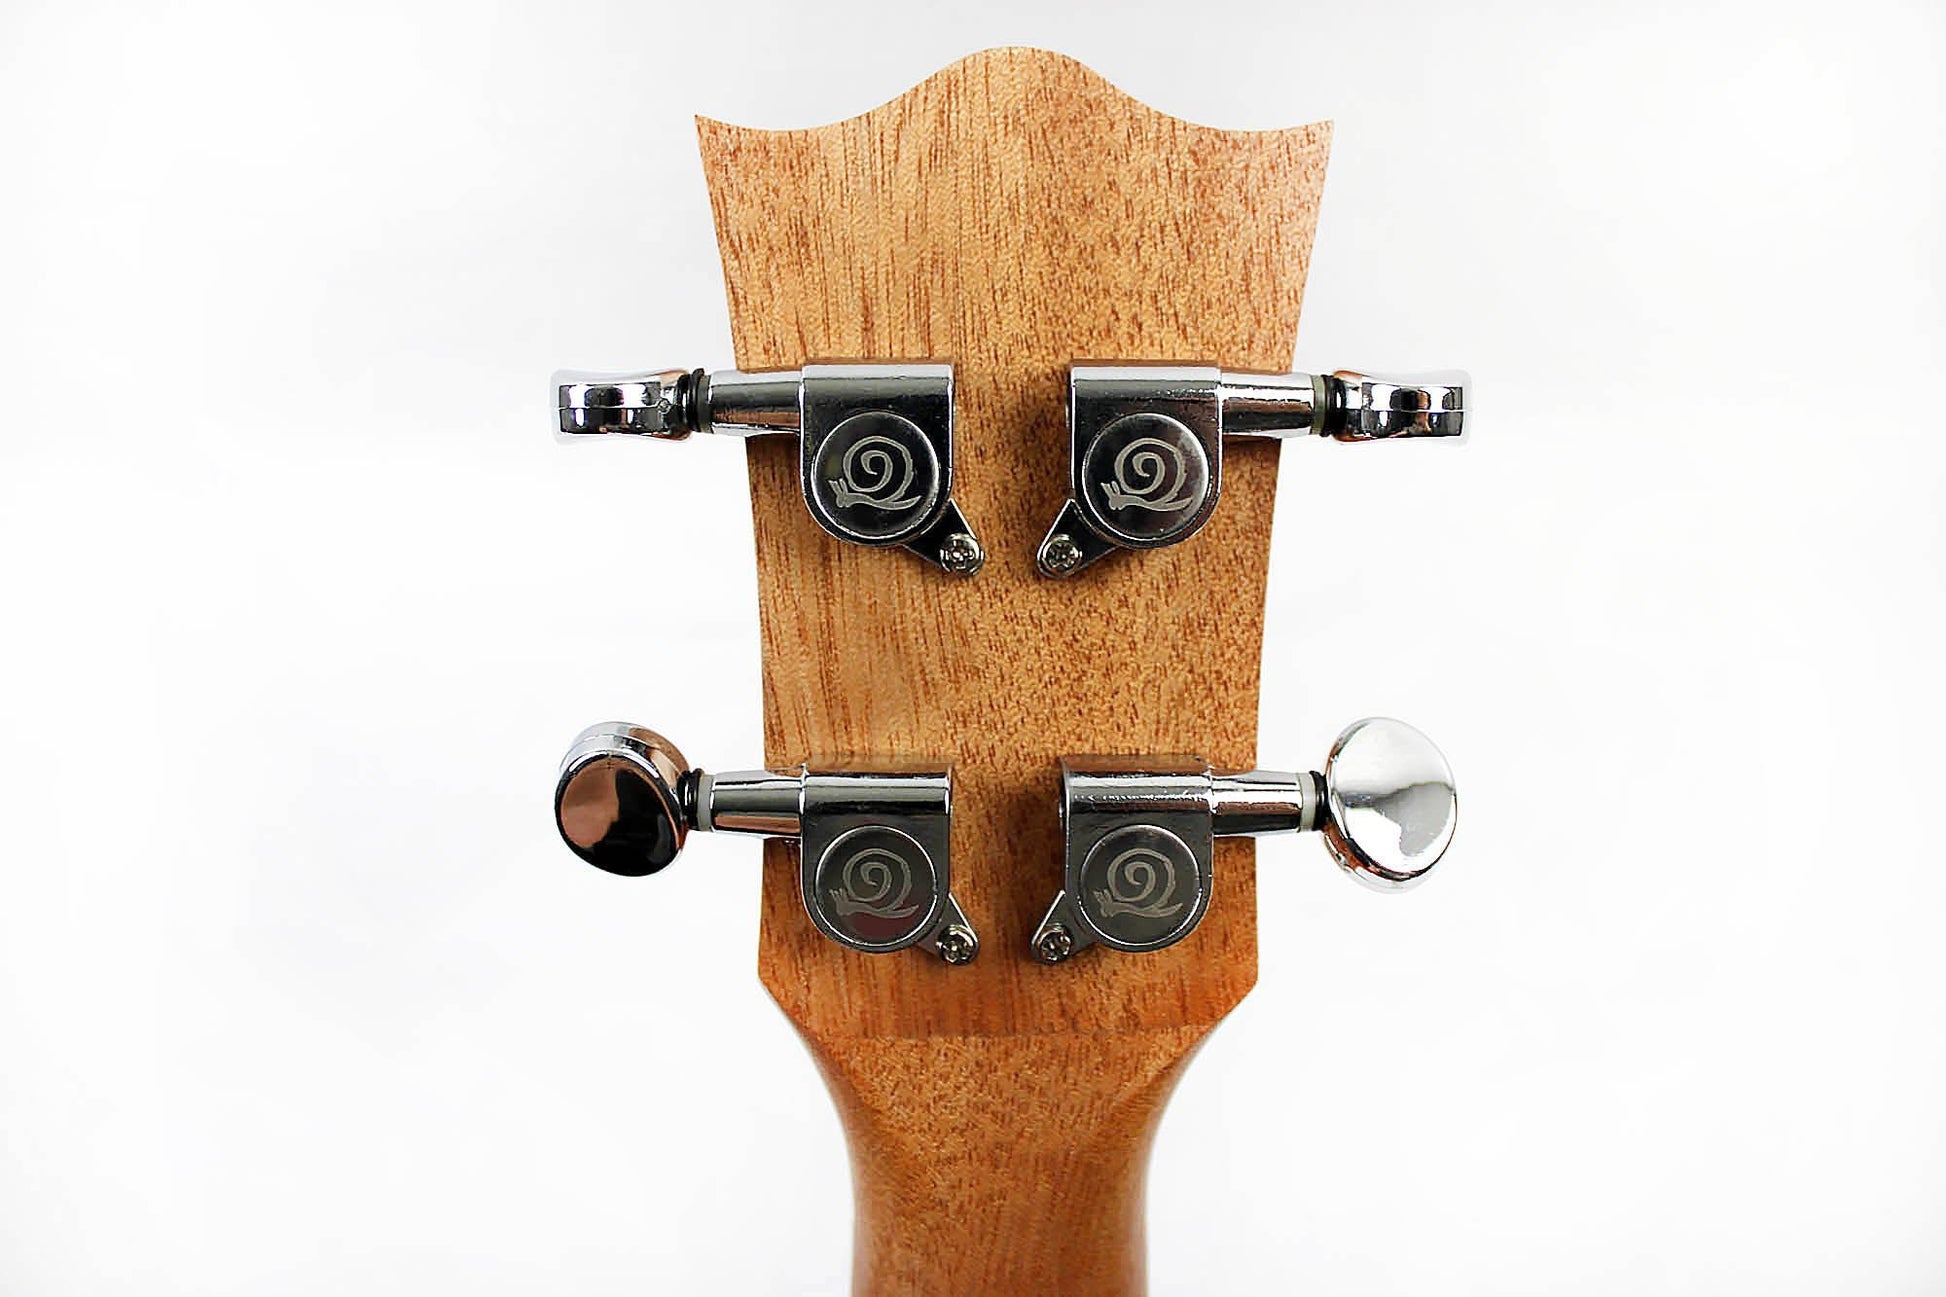 This is the back of the headstock of a Snail SNAILBOCUKC Bocote Concert Ukulele.